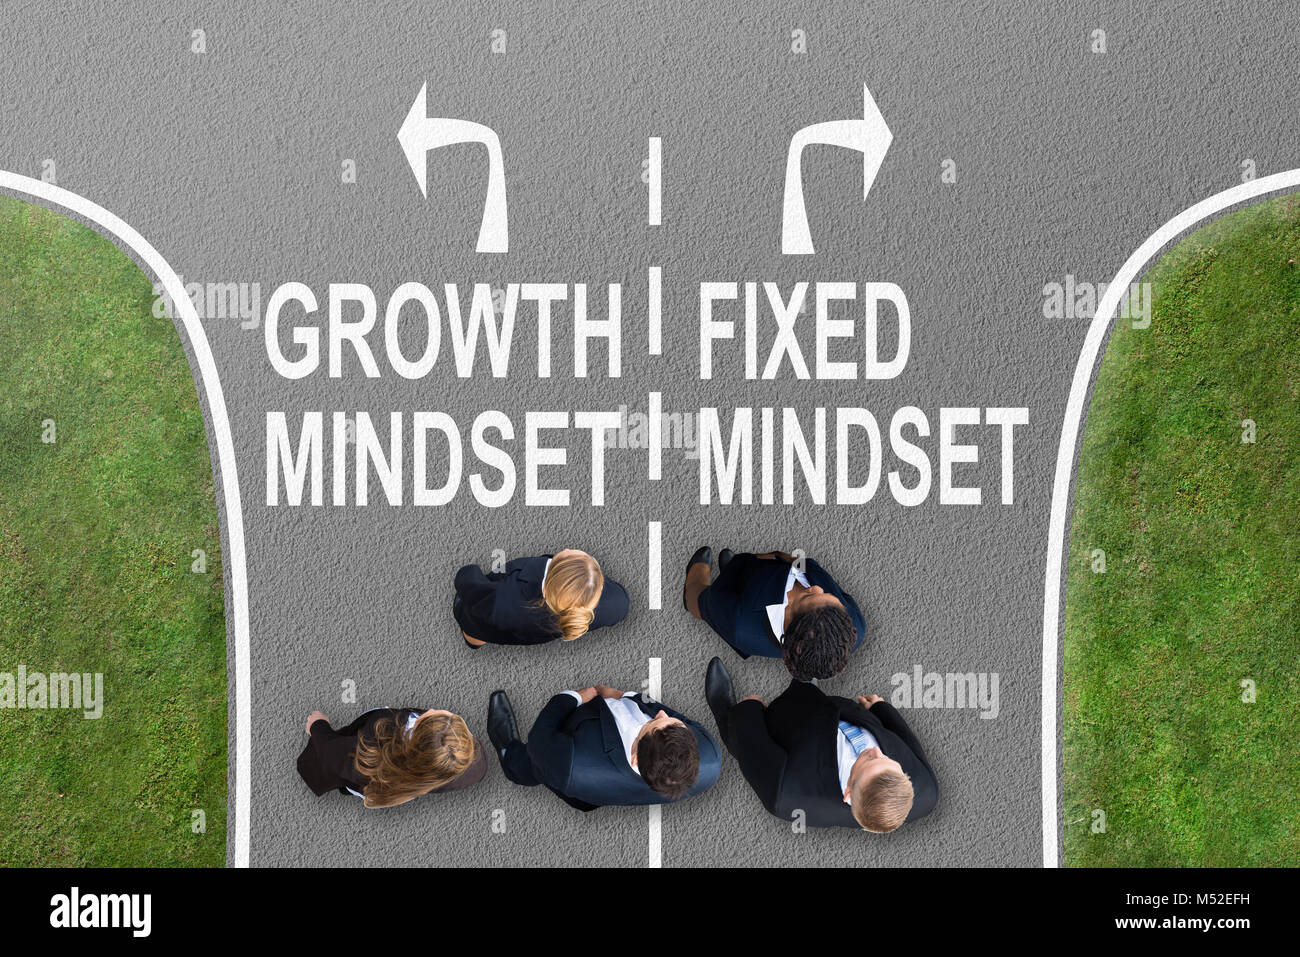 Businesspeople Standing On Road With Arrow Sign Showing Growth Mindset And Fixed Mindset Direction Stock Photo